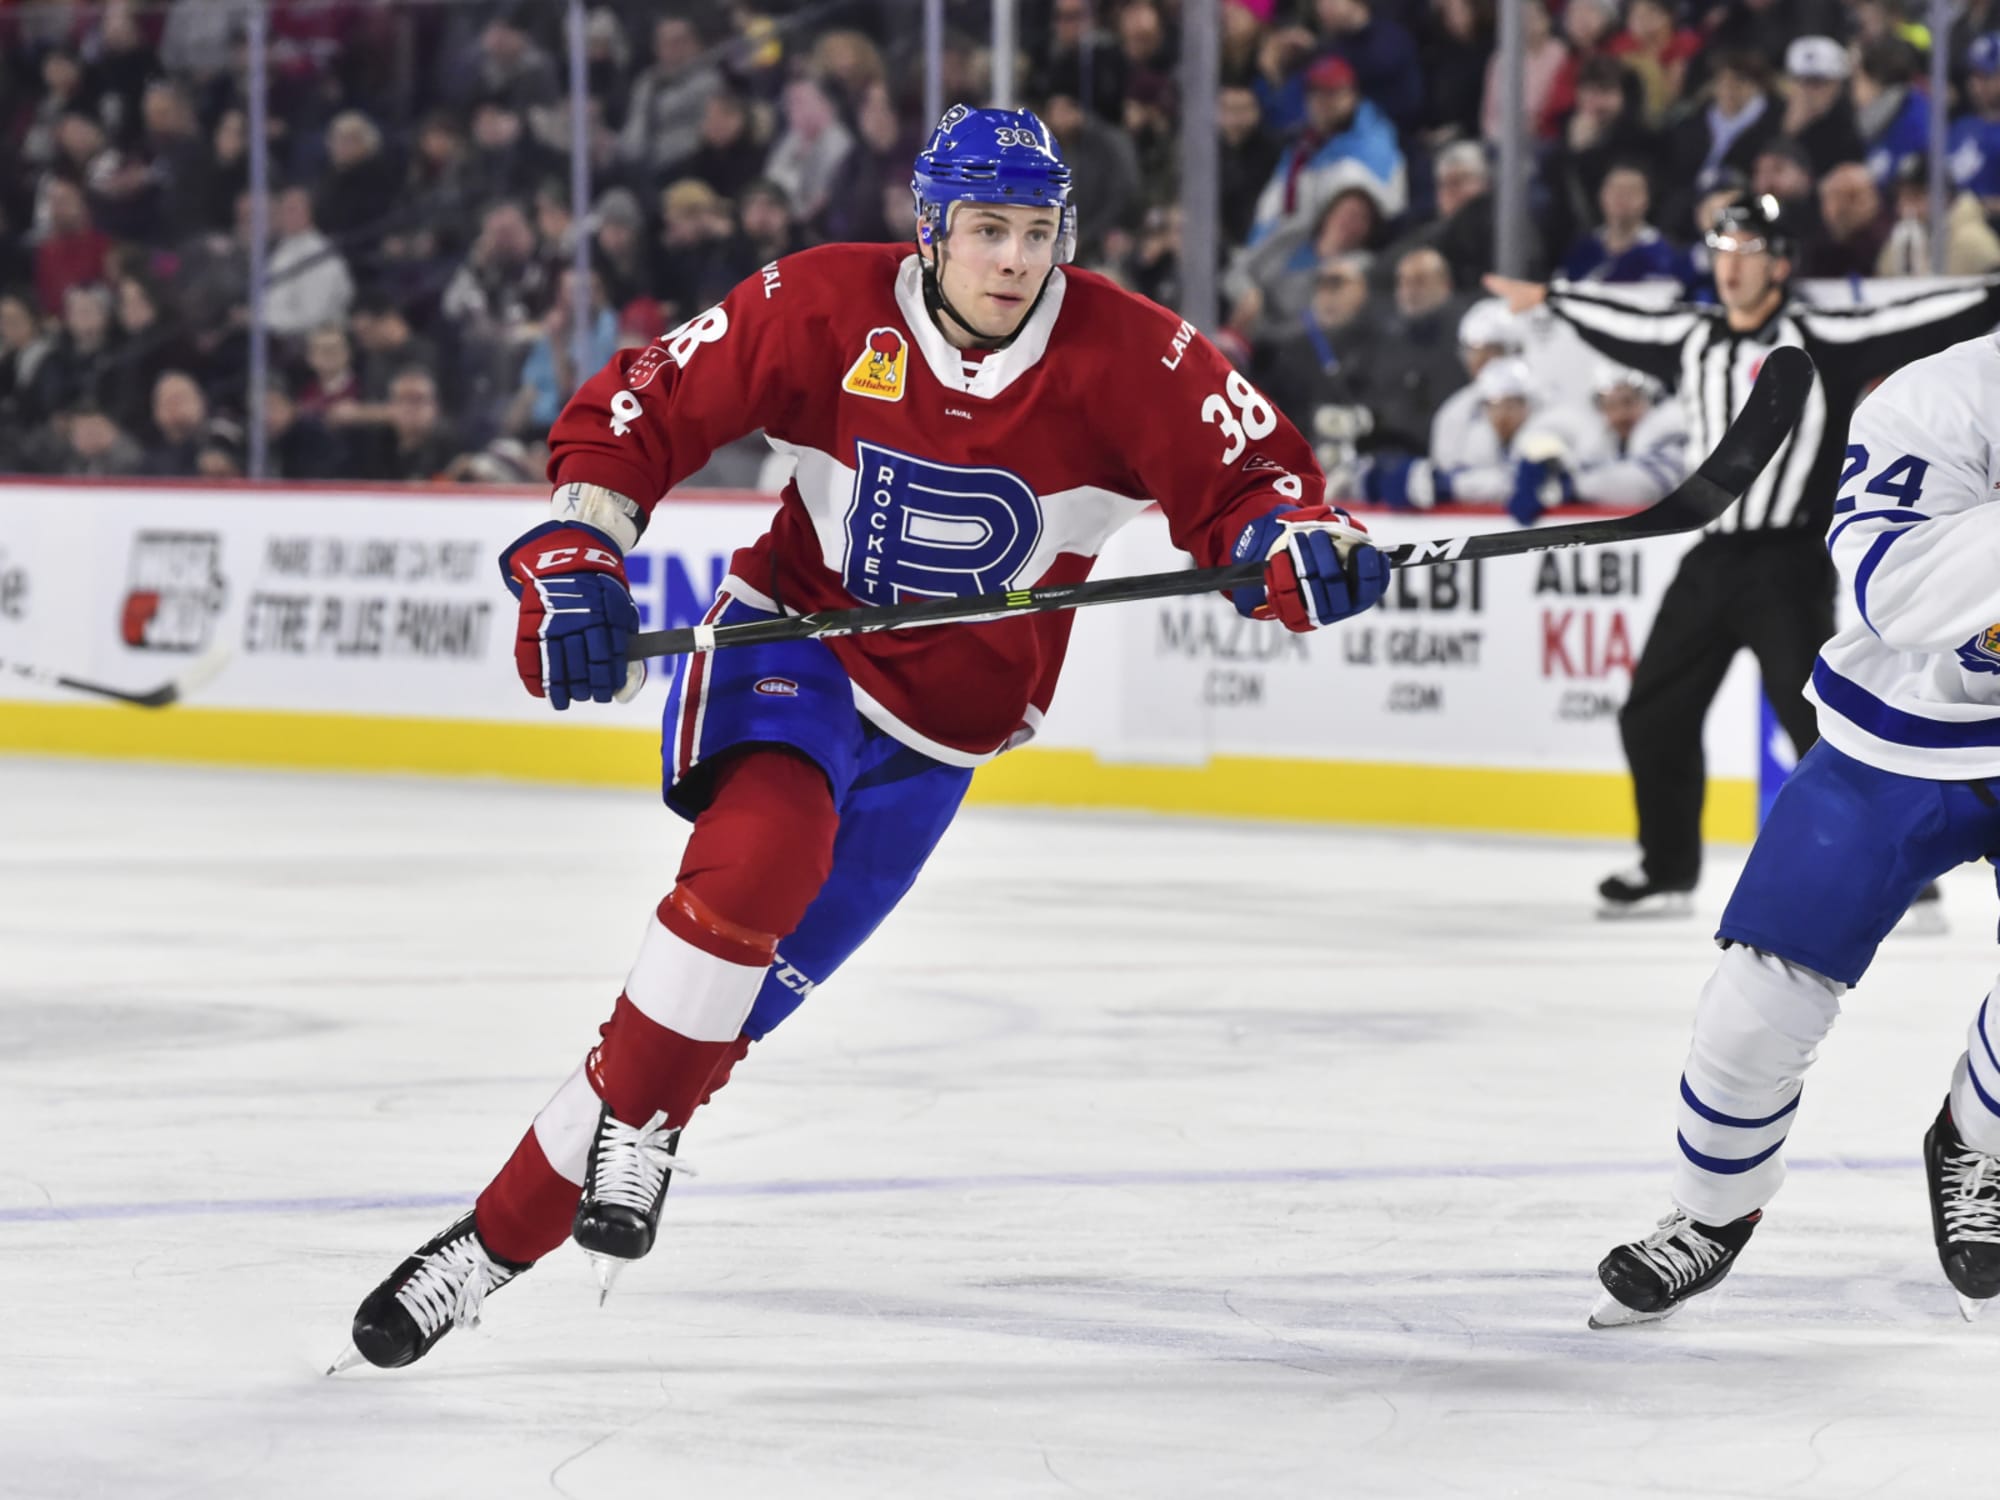 Rocket agree to terms on a one-year, one-way AHL contract with